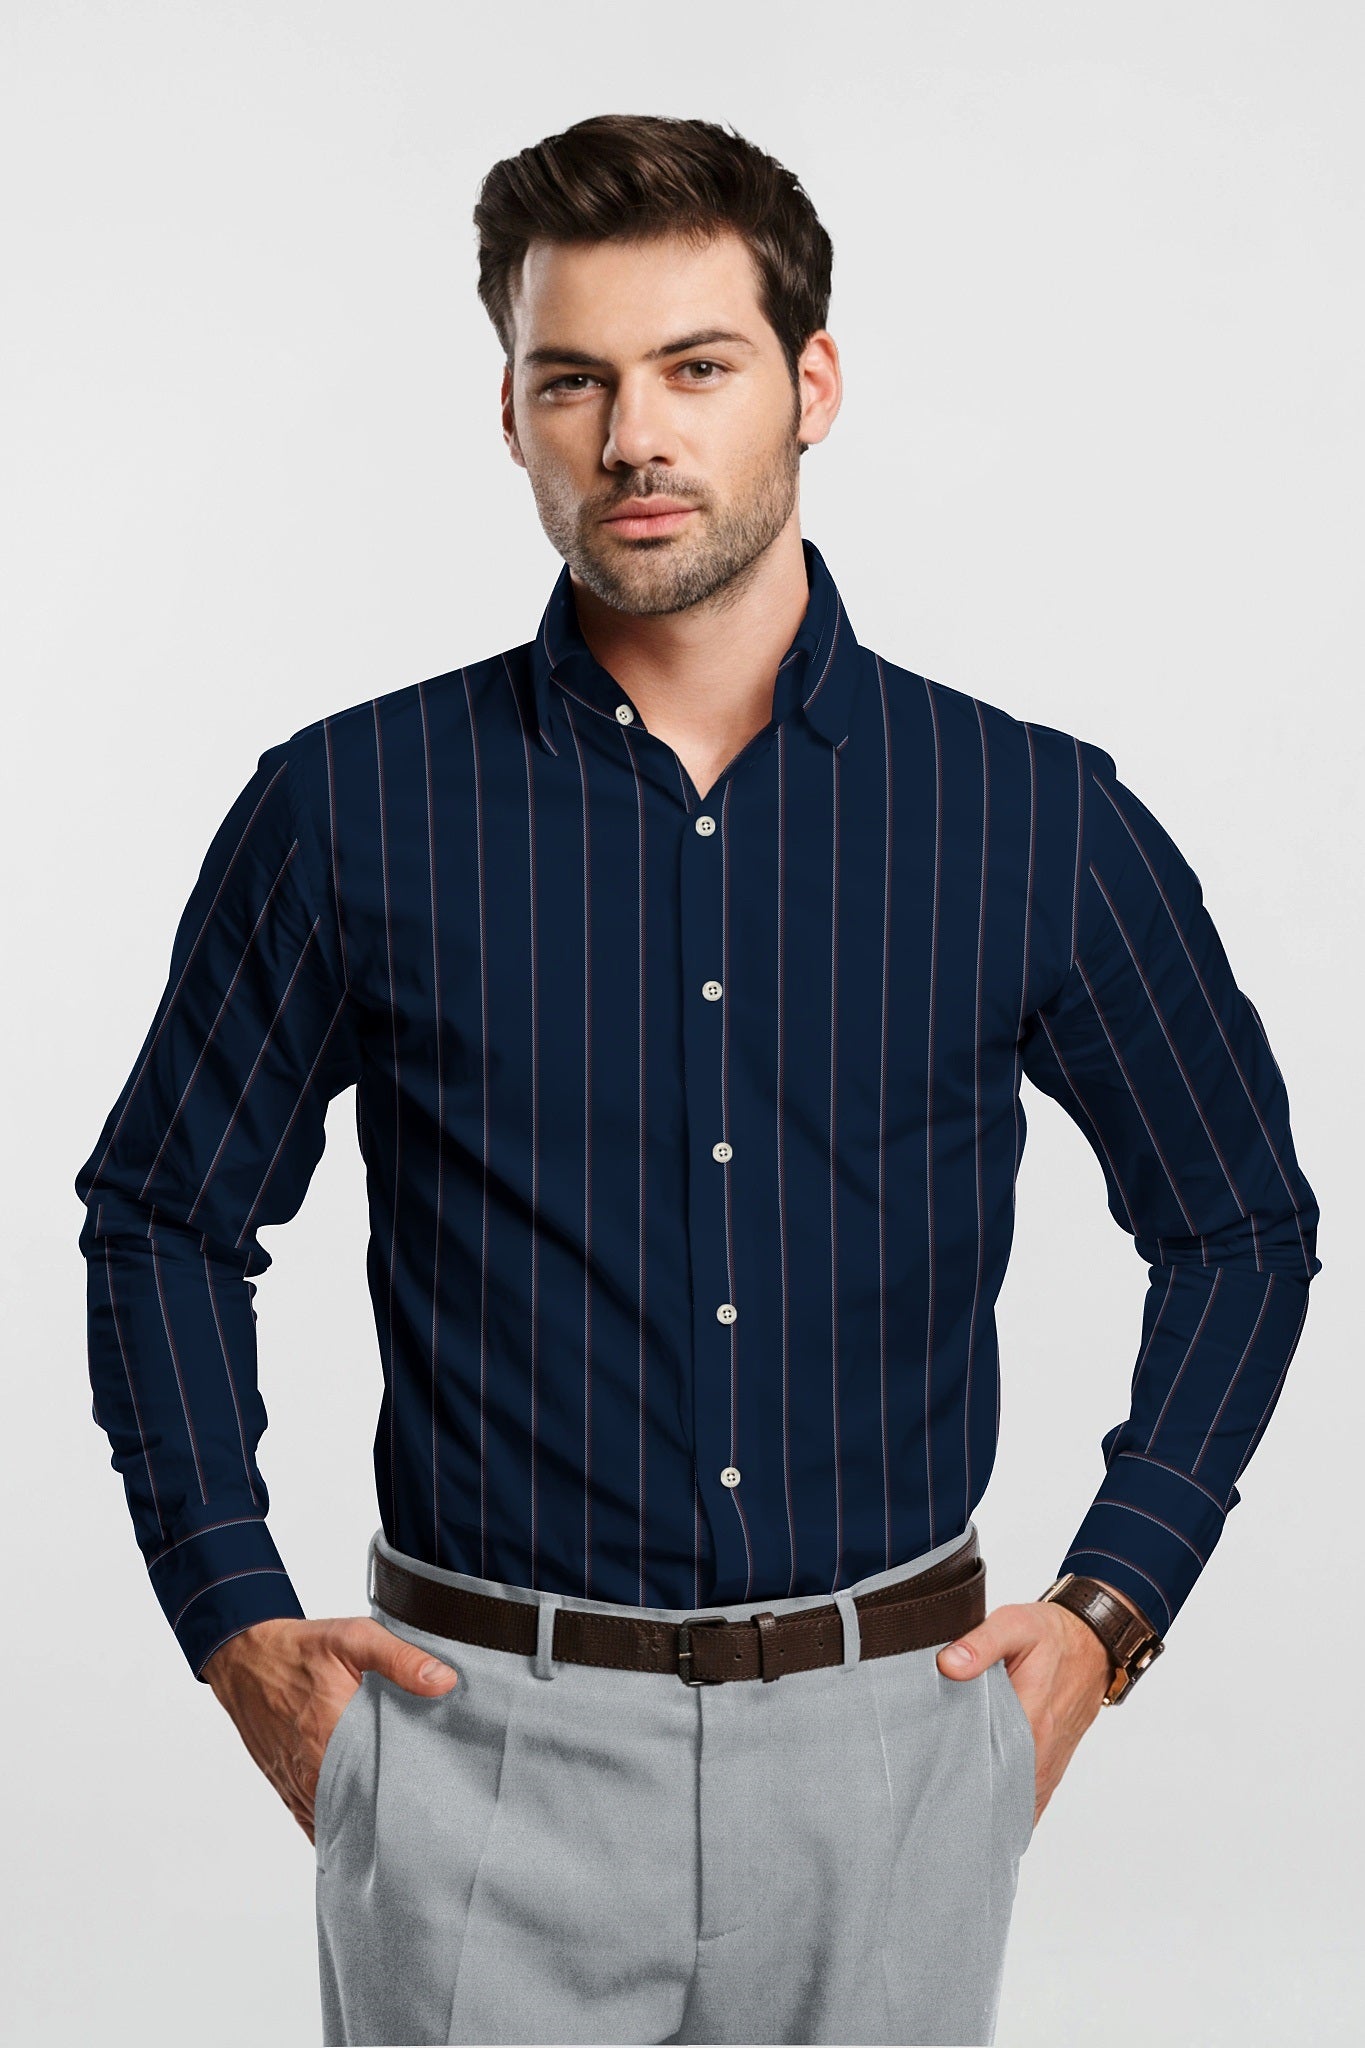 Denim Blue with Rust Red, Black and White Stripes Men's Cotton Shirt